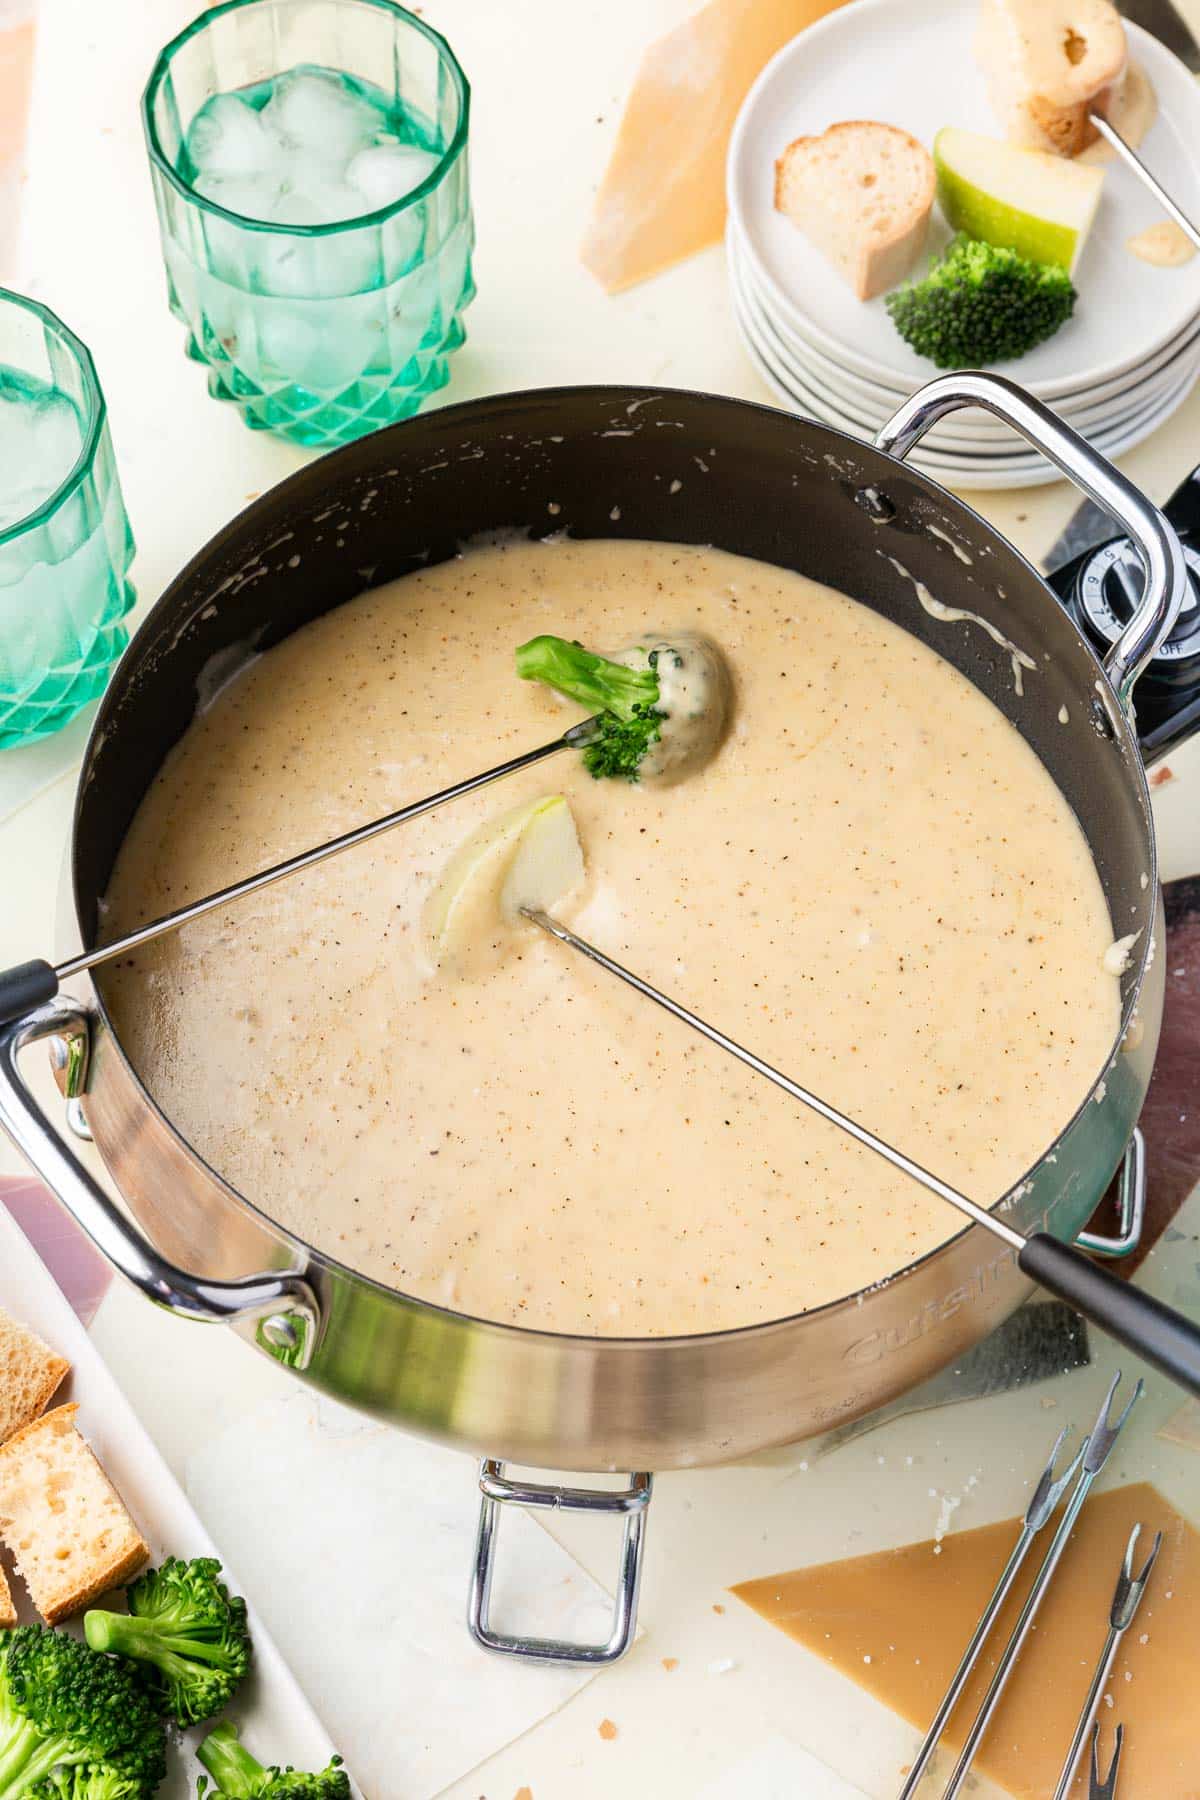 An electric fondue pot of glute-free cheese fondue that has a skewer of broccoli and a skewer of apple dipped into it with additional plates of dippers to the side.